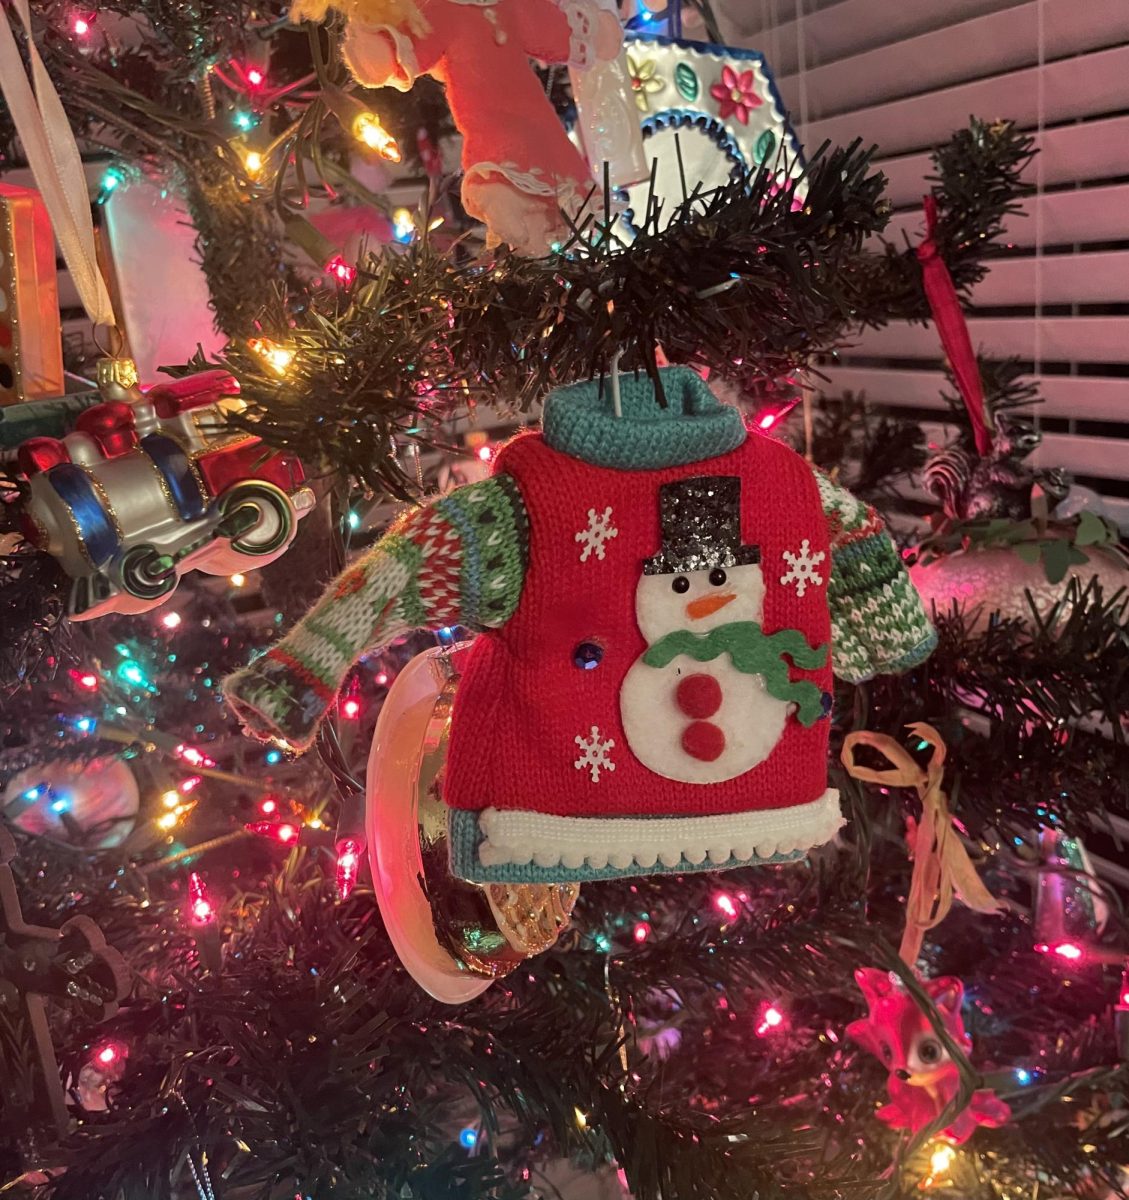 Ugly sweaters can make their way into most every holiday tradition, even the Christmas tree!